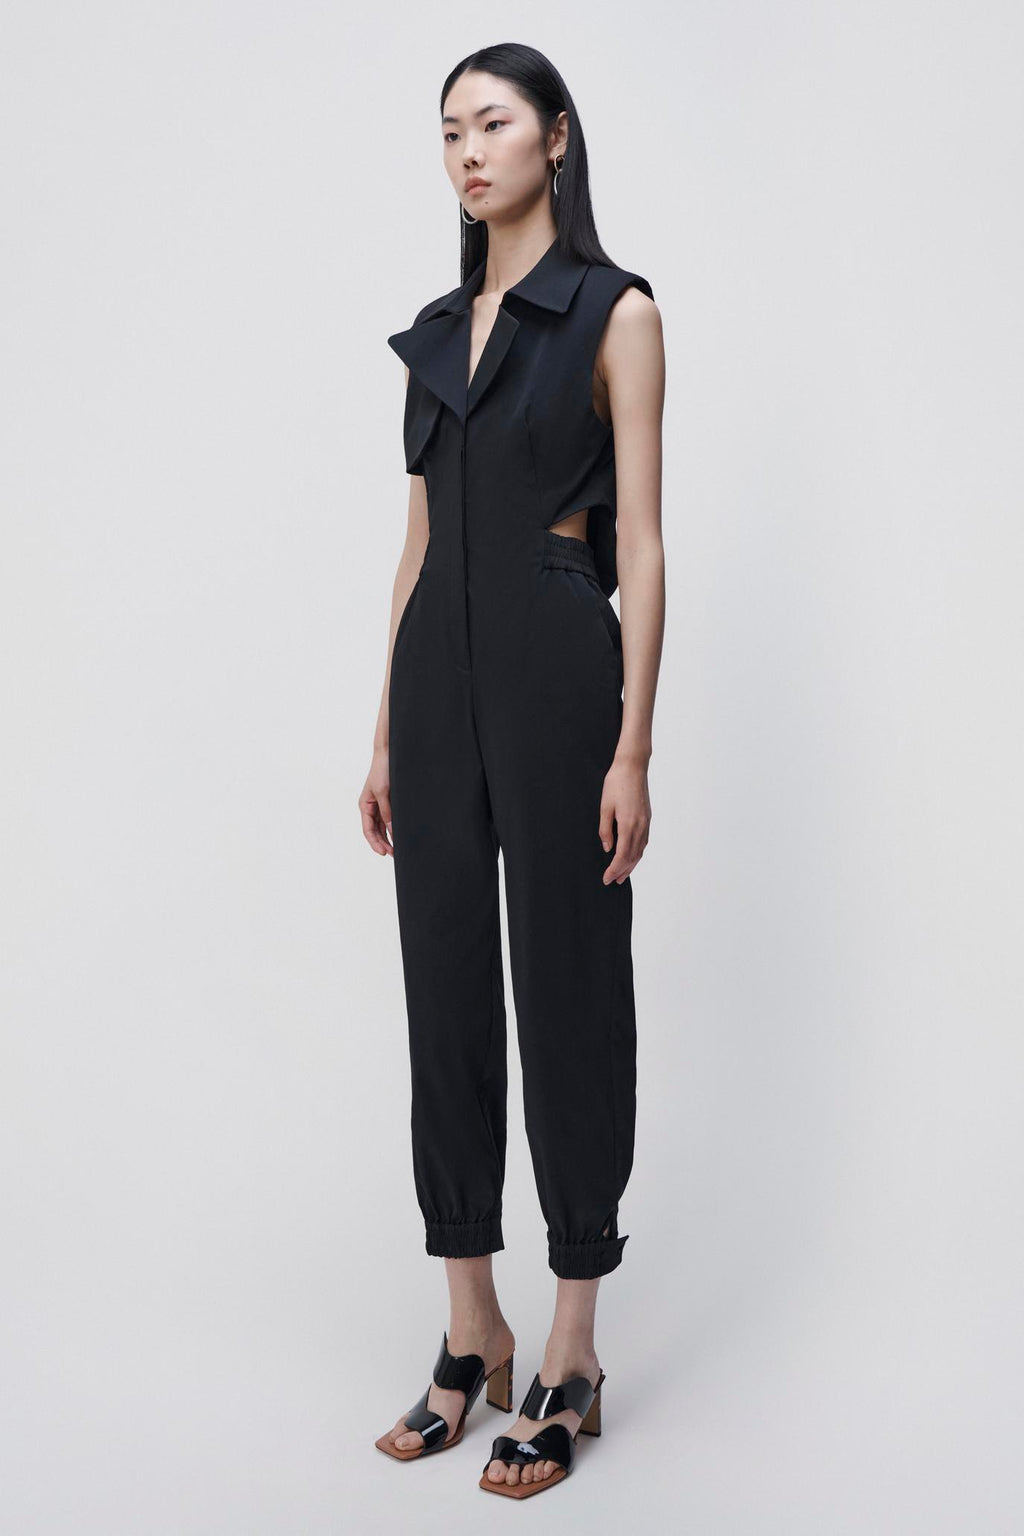 Rayley Trench Jumpsuit